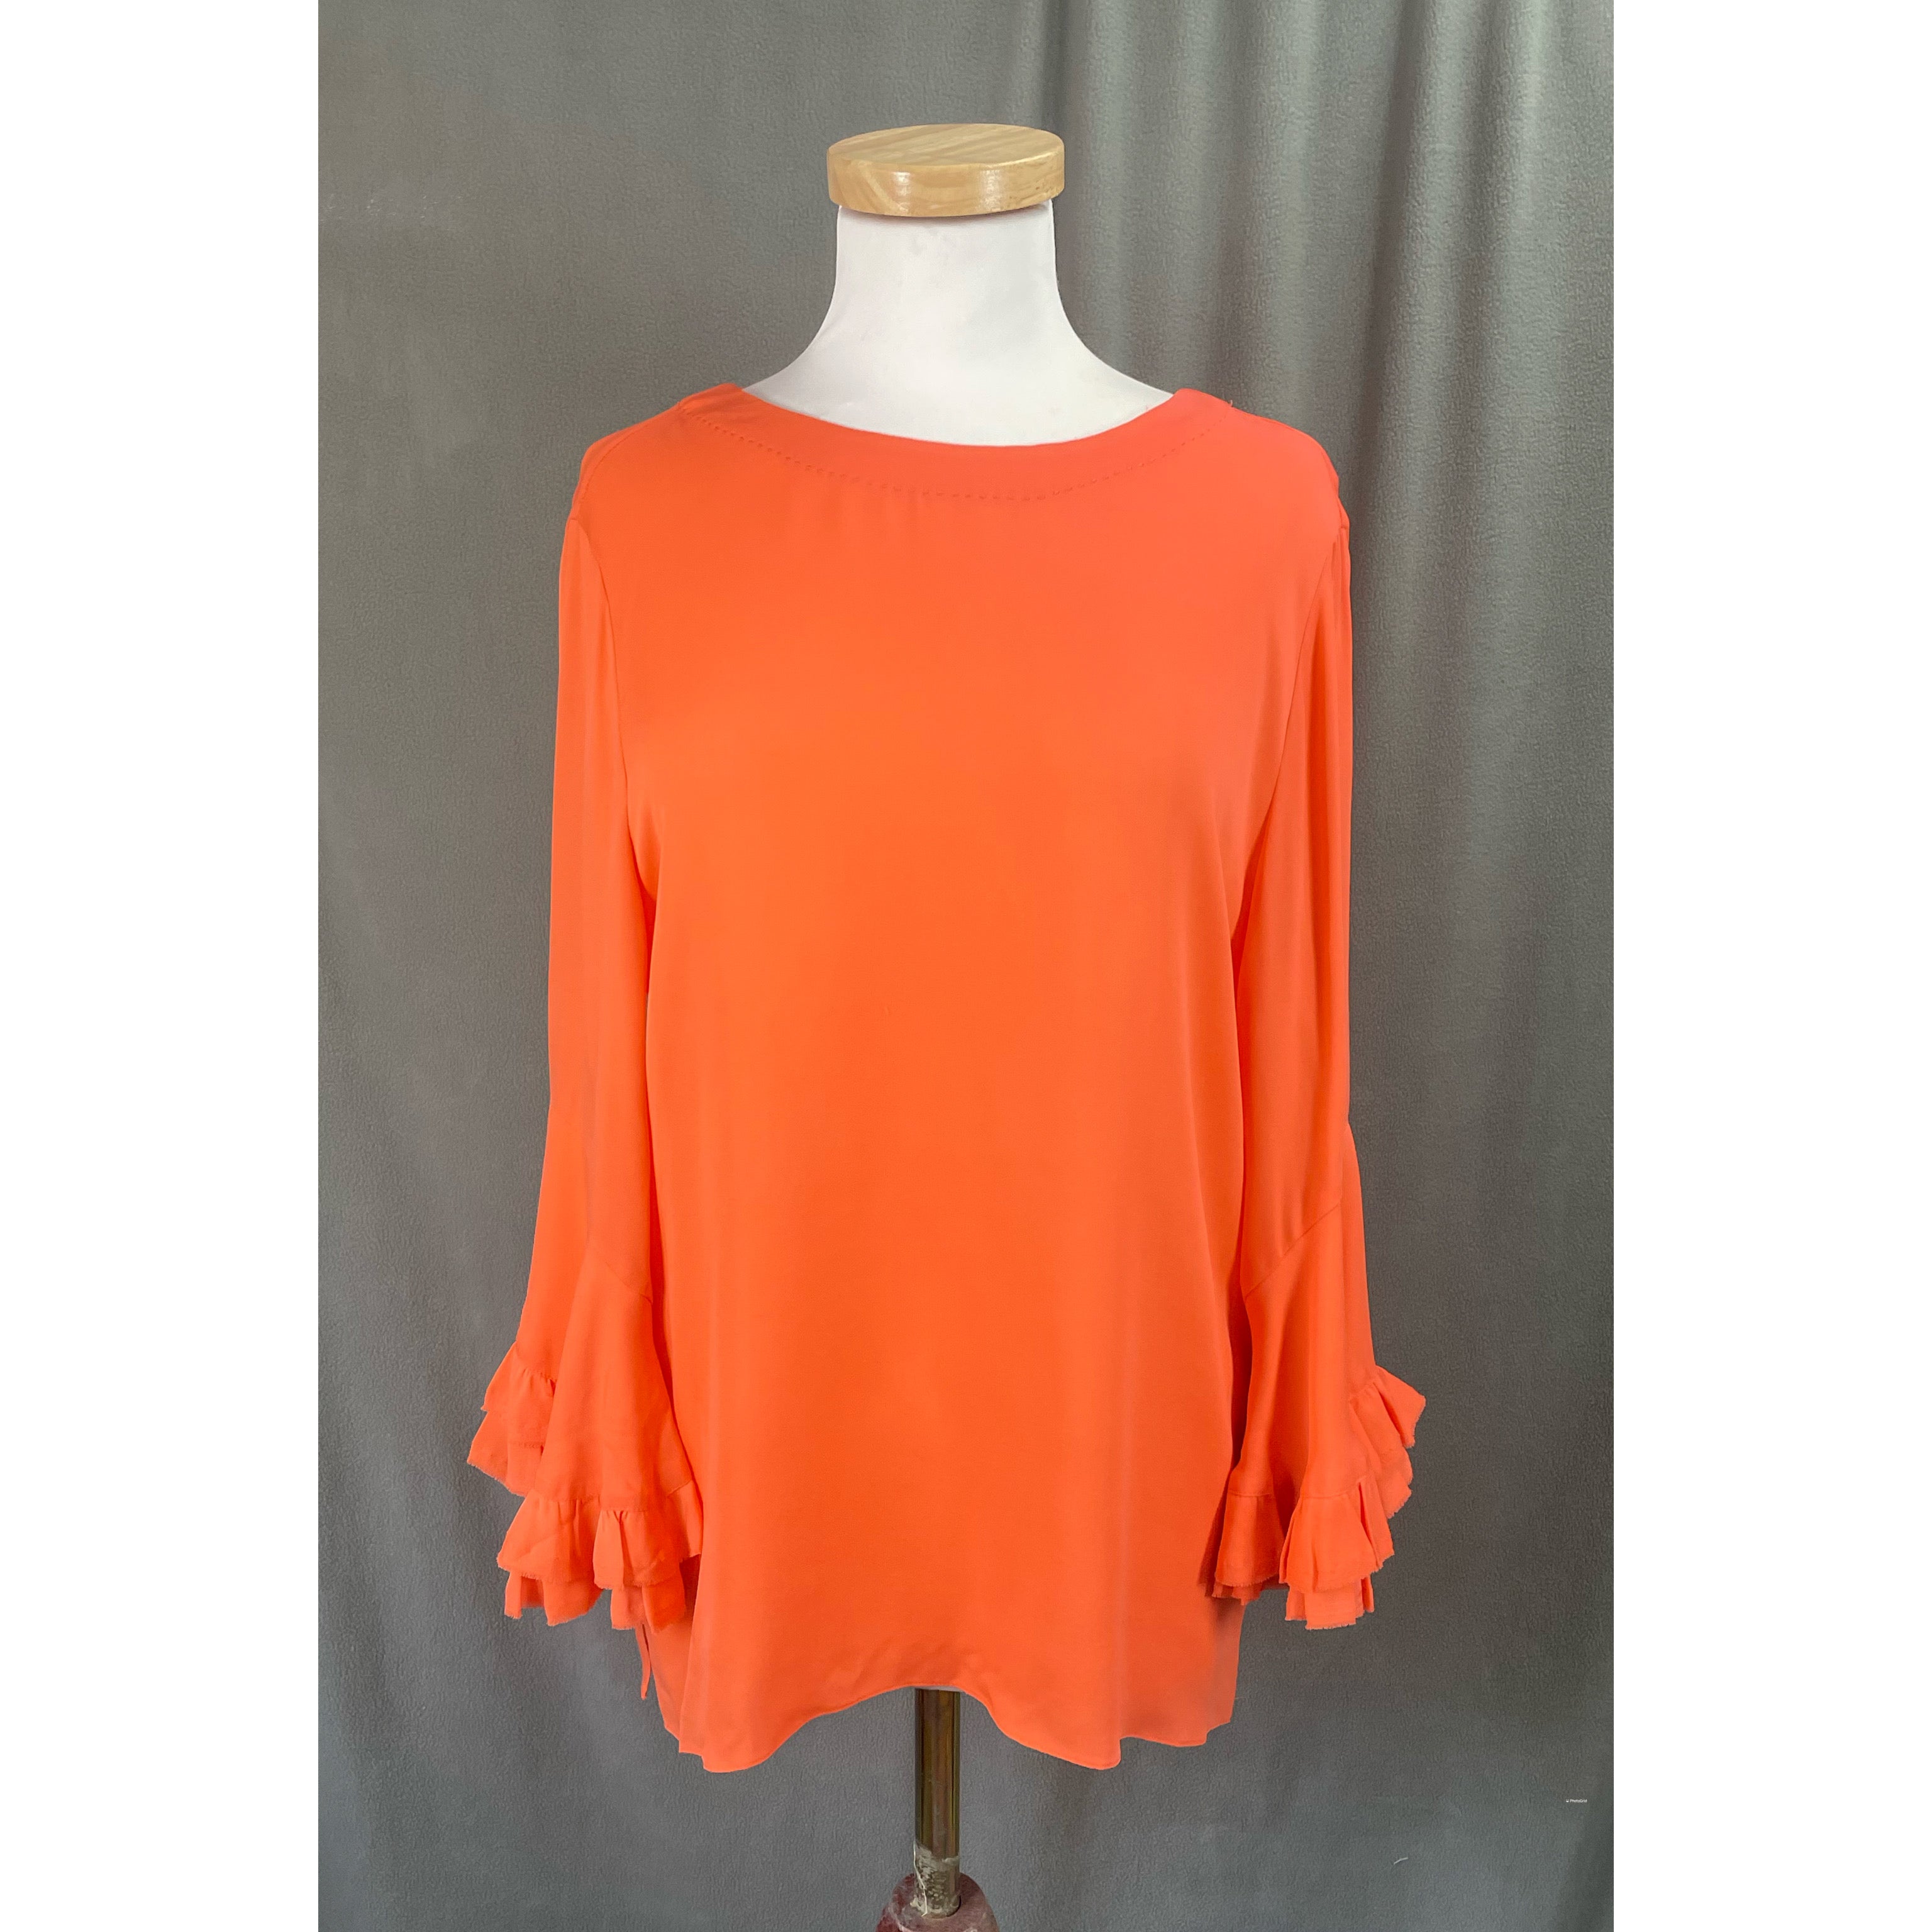 Kobi Halperin coral silk blouse, size M, NEW WITH TAGS!